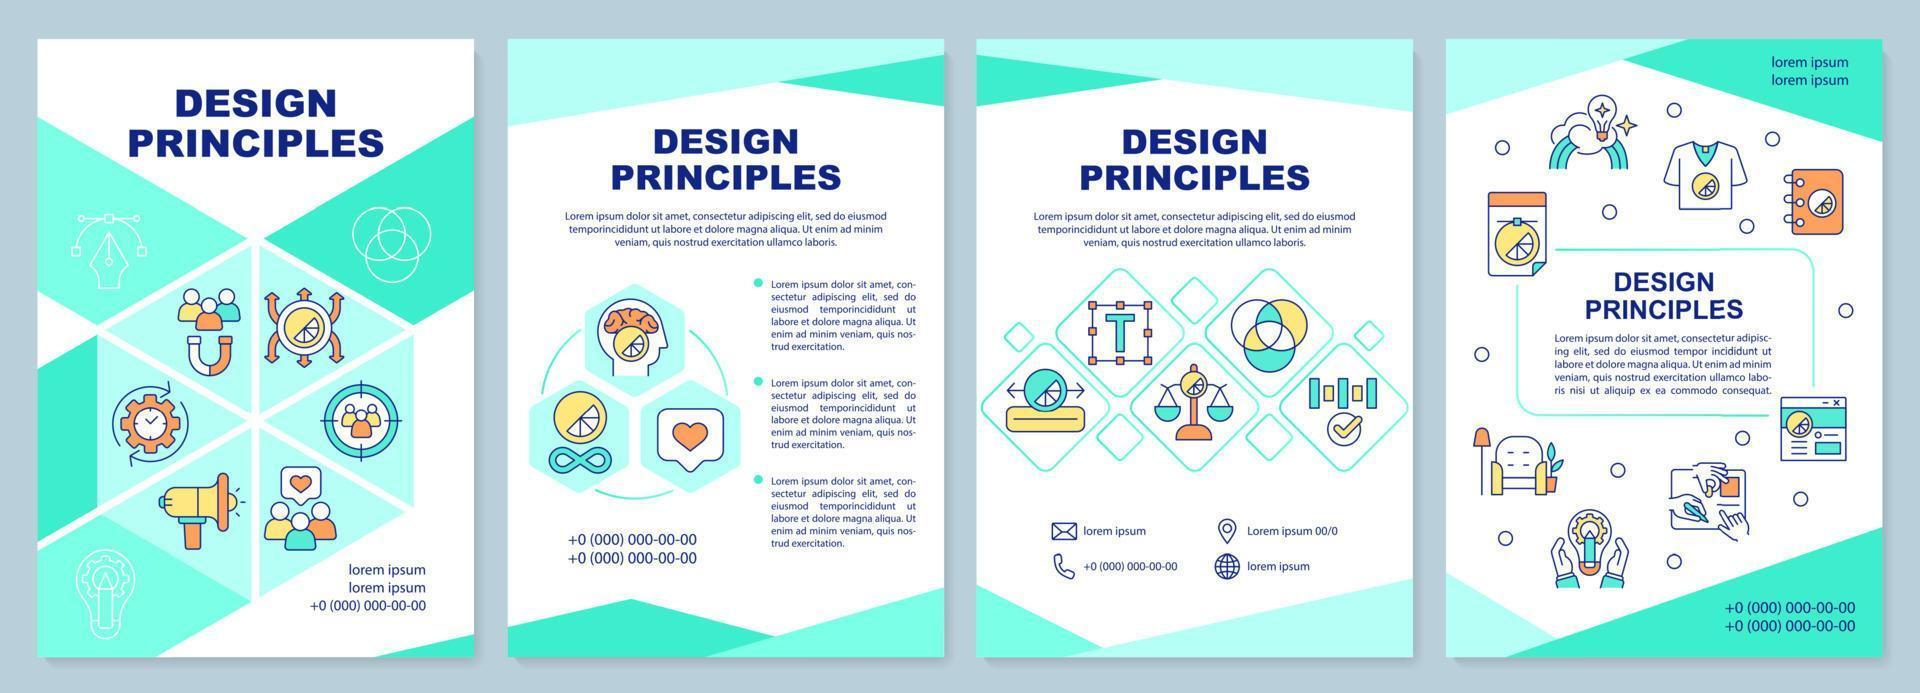 Design principles mint brochure template. Business style. Leaflet design with linear icons. 4 vector layouts for presentation, annual reports. Arial-Black, Myriad Pro-Regular fonts used